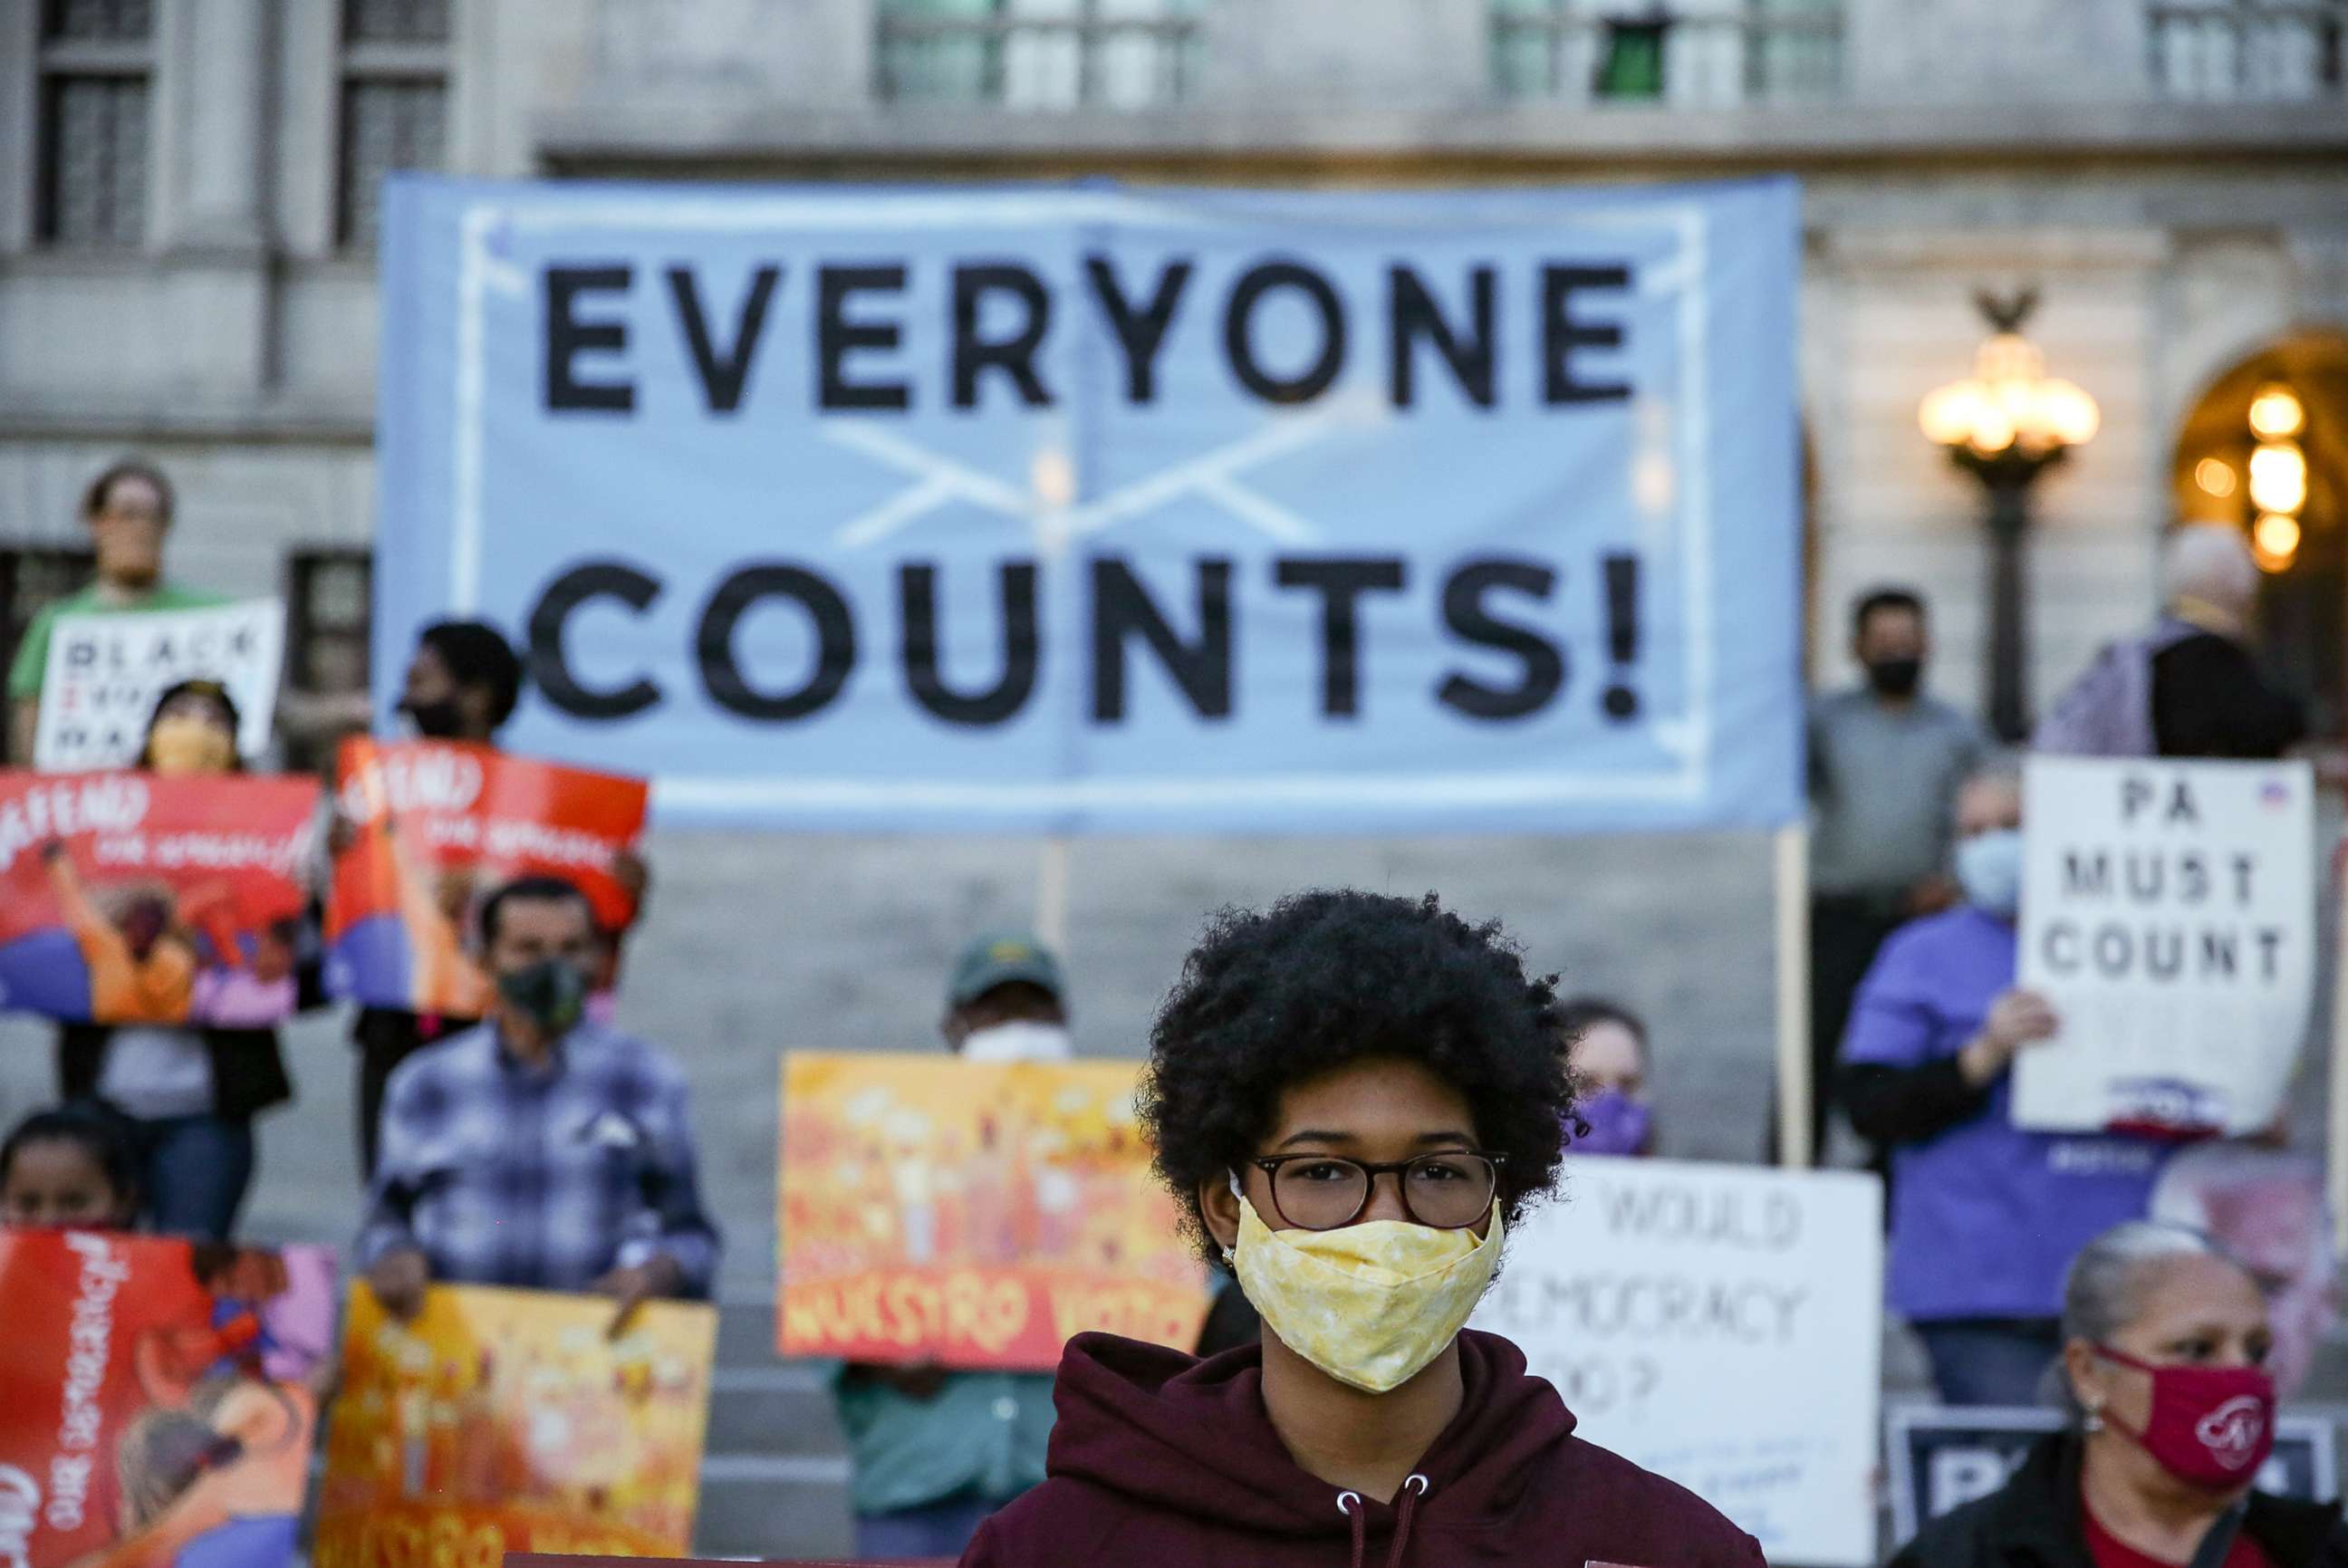 PHOTO: Children and adults take part in a display of the "Count Every Vote" slogan during a Count Every Vote demonstration at the Pennsylvania State Capitol on Nov. 5, 2020 in Harrisburg, Penn.